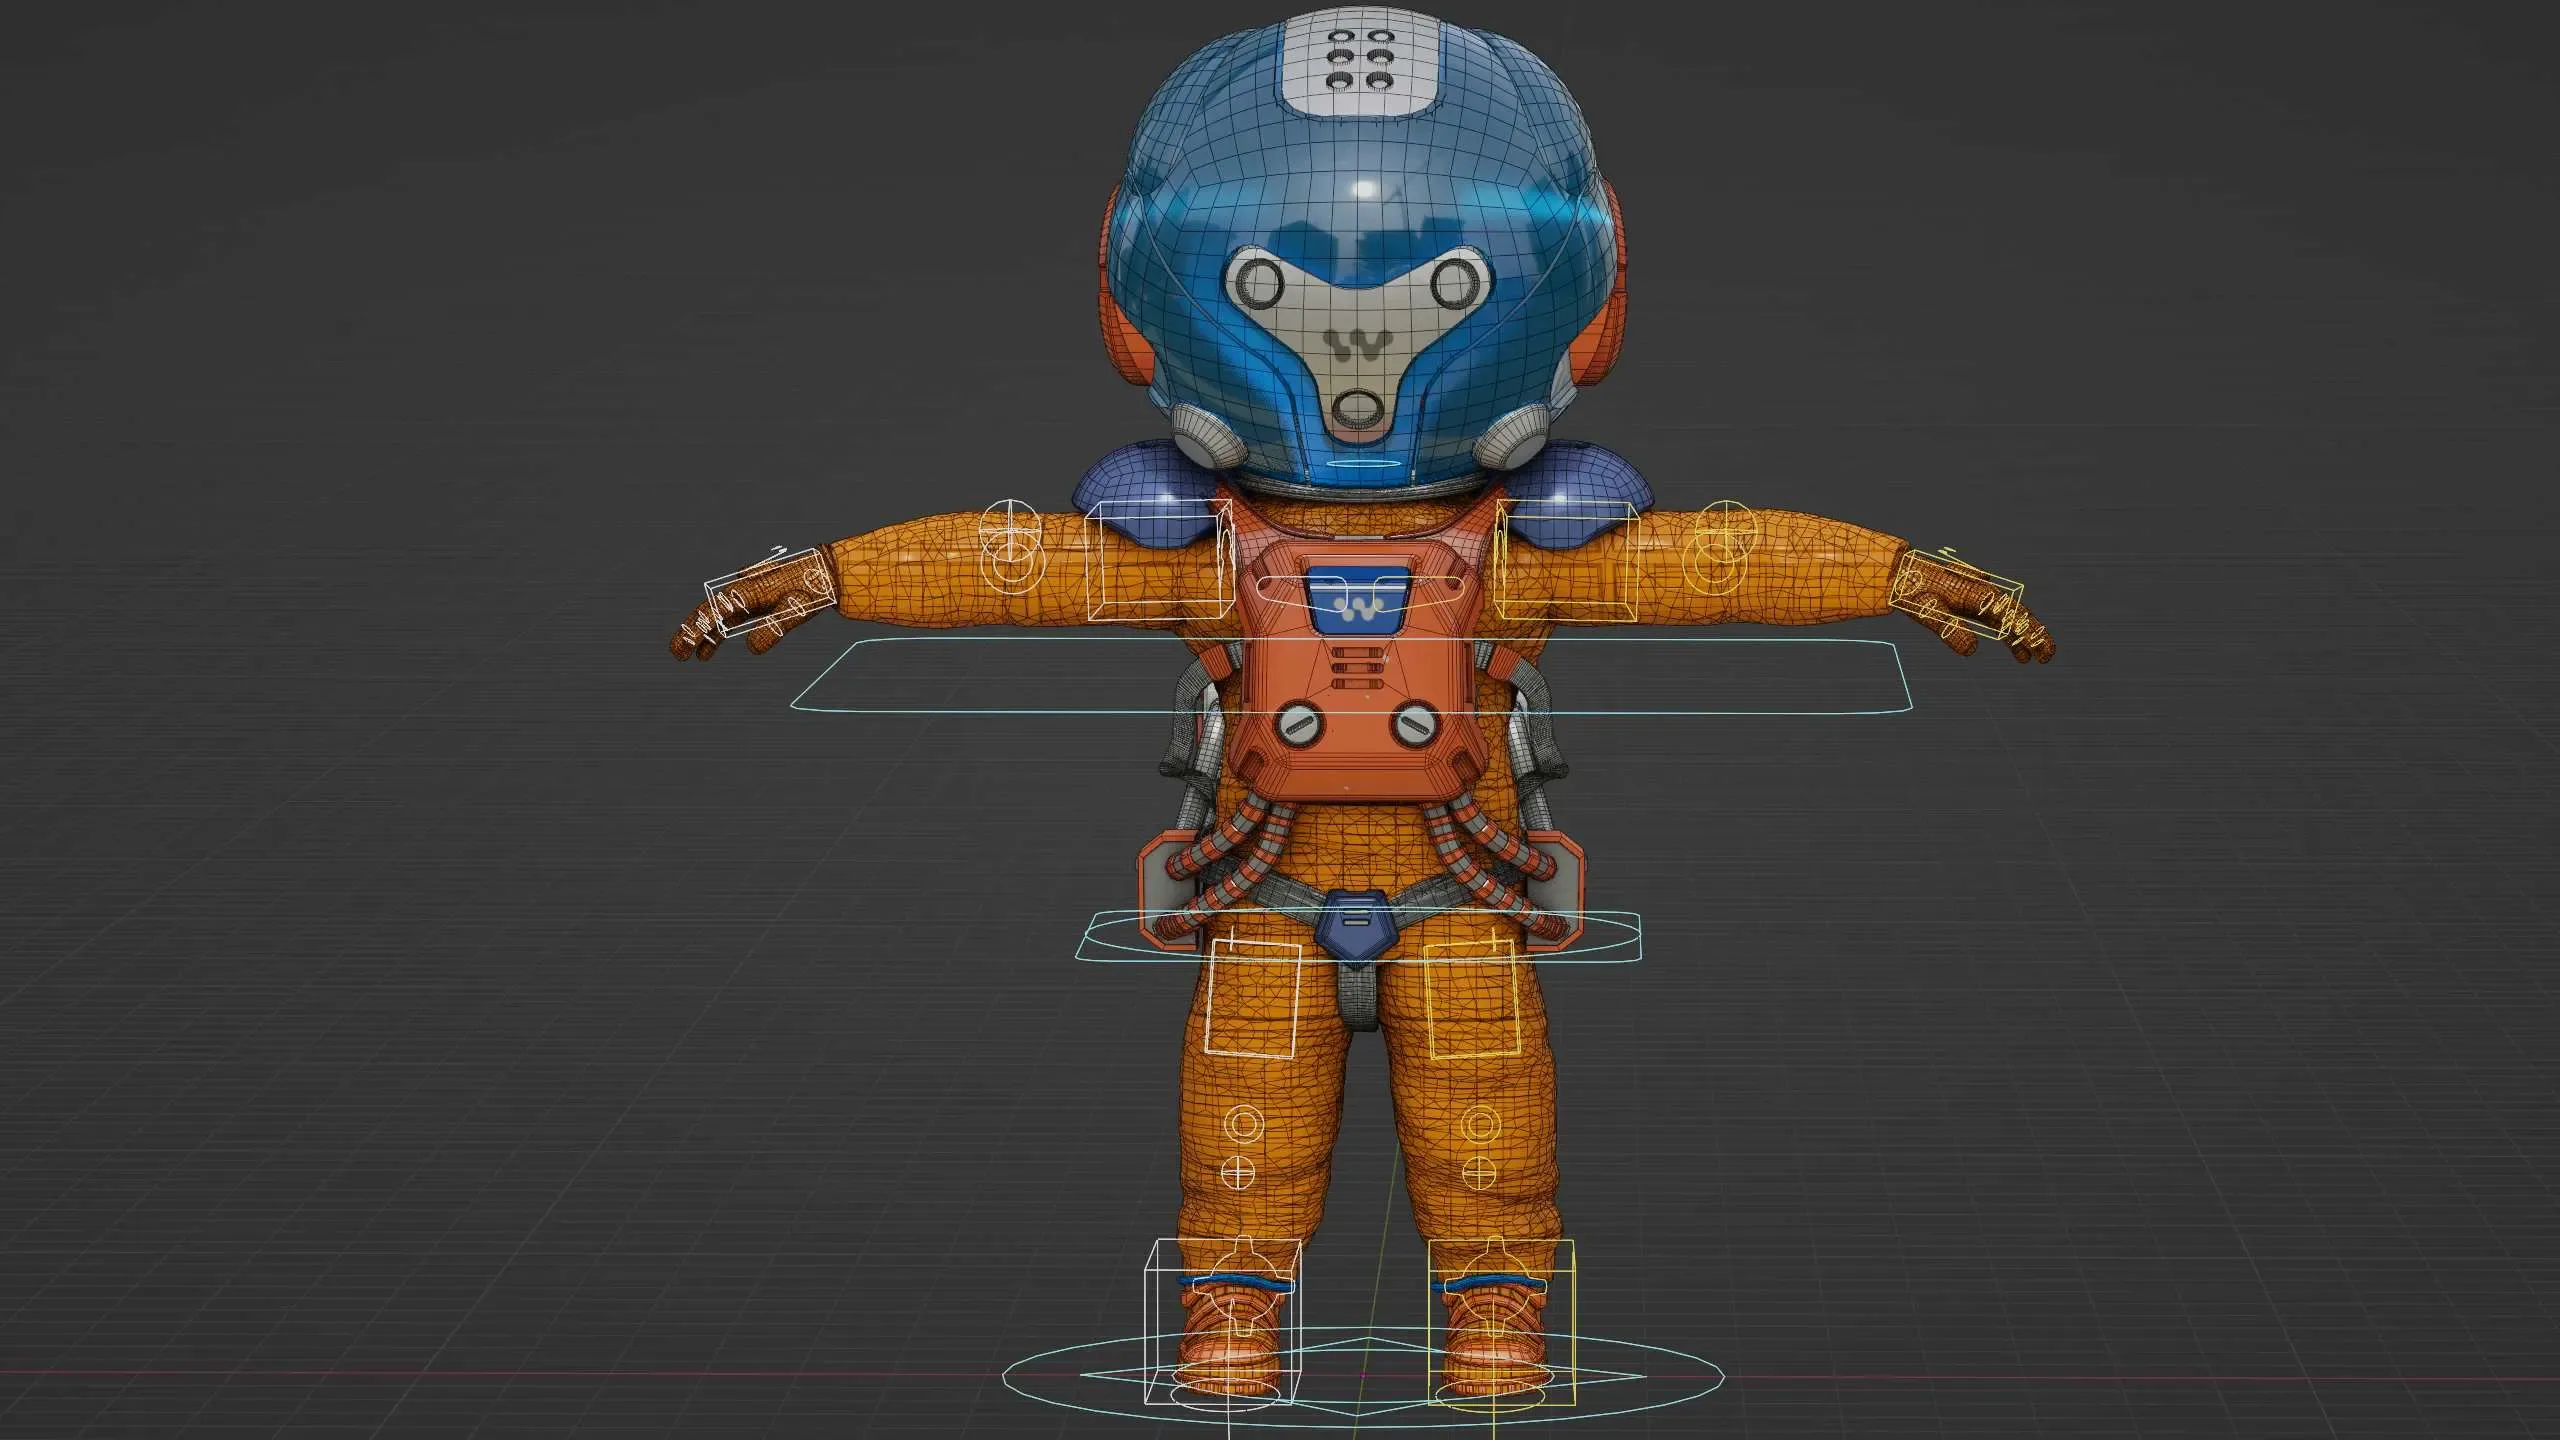 Toon Astronaut B-K Auto-Rig Pro Rigged For Mixamo, Unreal Engine Unity